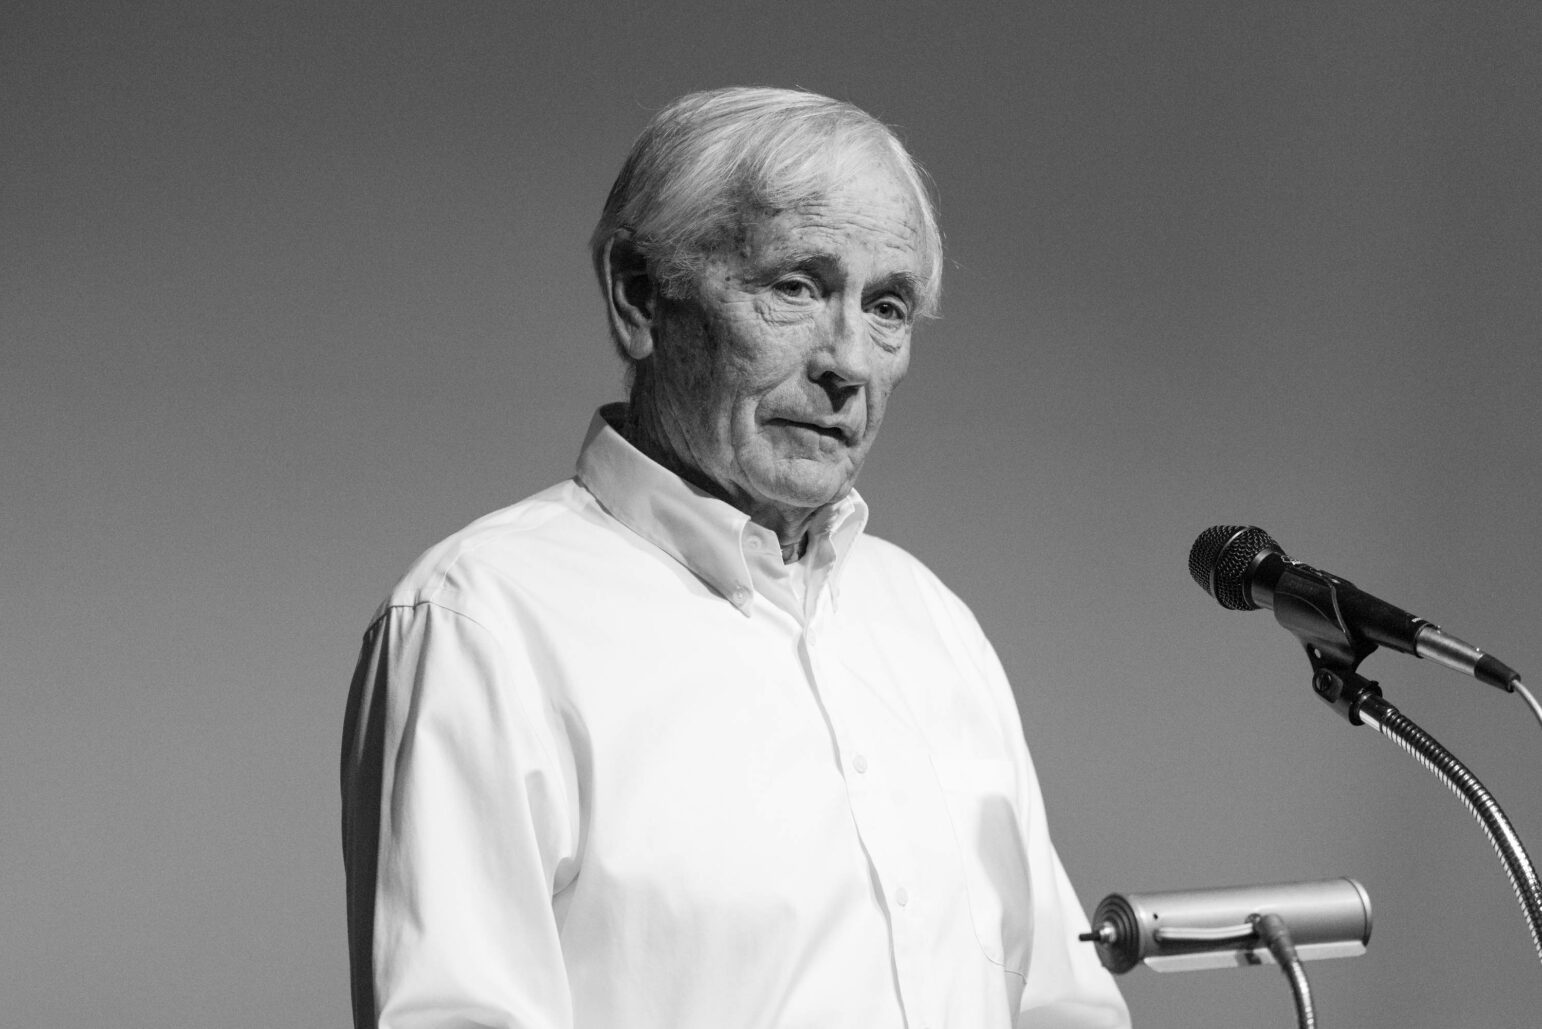 Black and white photo of a man speaking into a microphone. He is dressed in a white shirt and appears to be engaged in a serious discussion, with a thoughtful expression. The background is a soft gray, highlighting his face and the microphone in front of him.